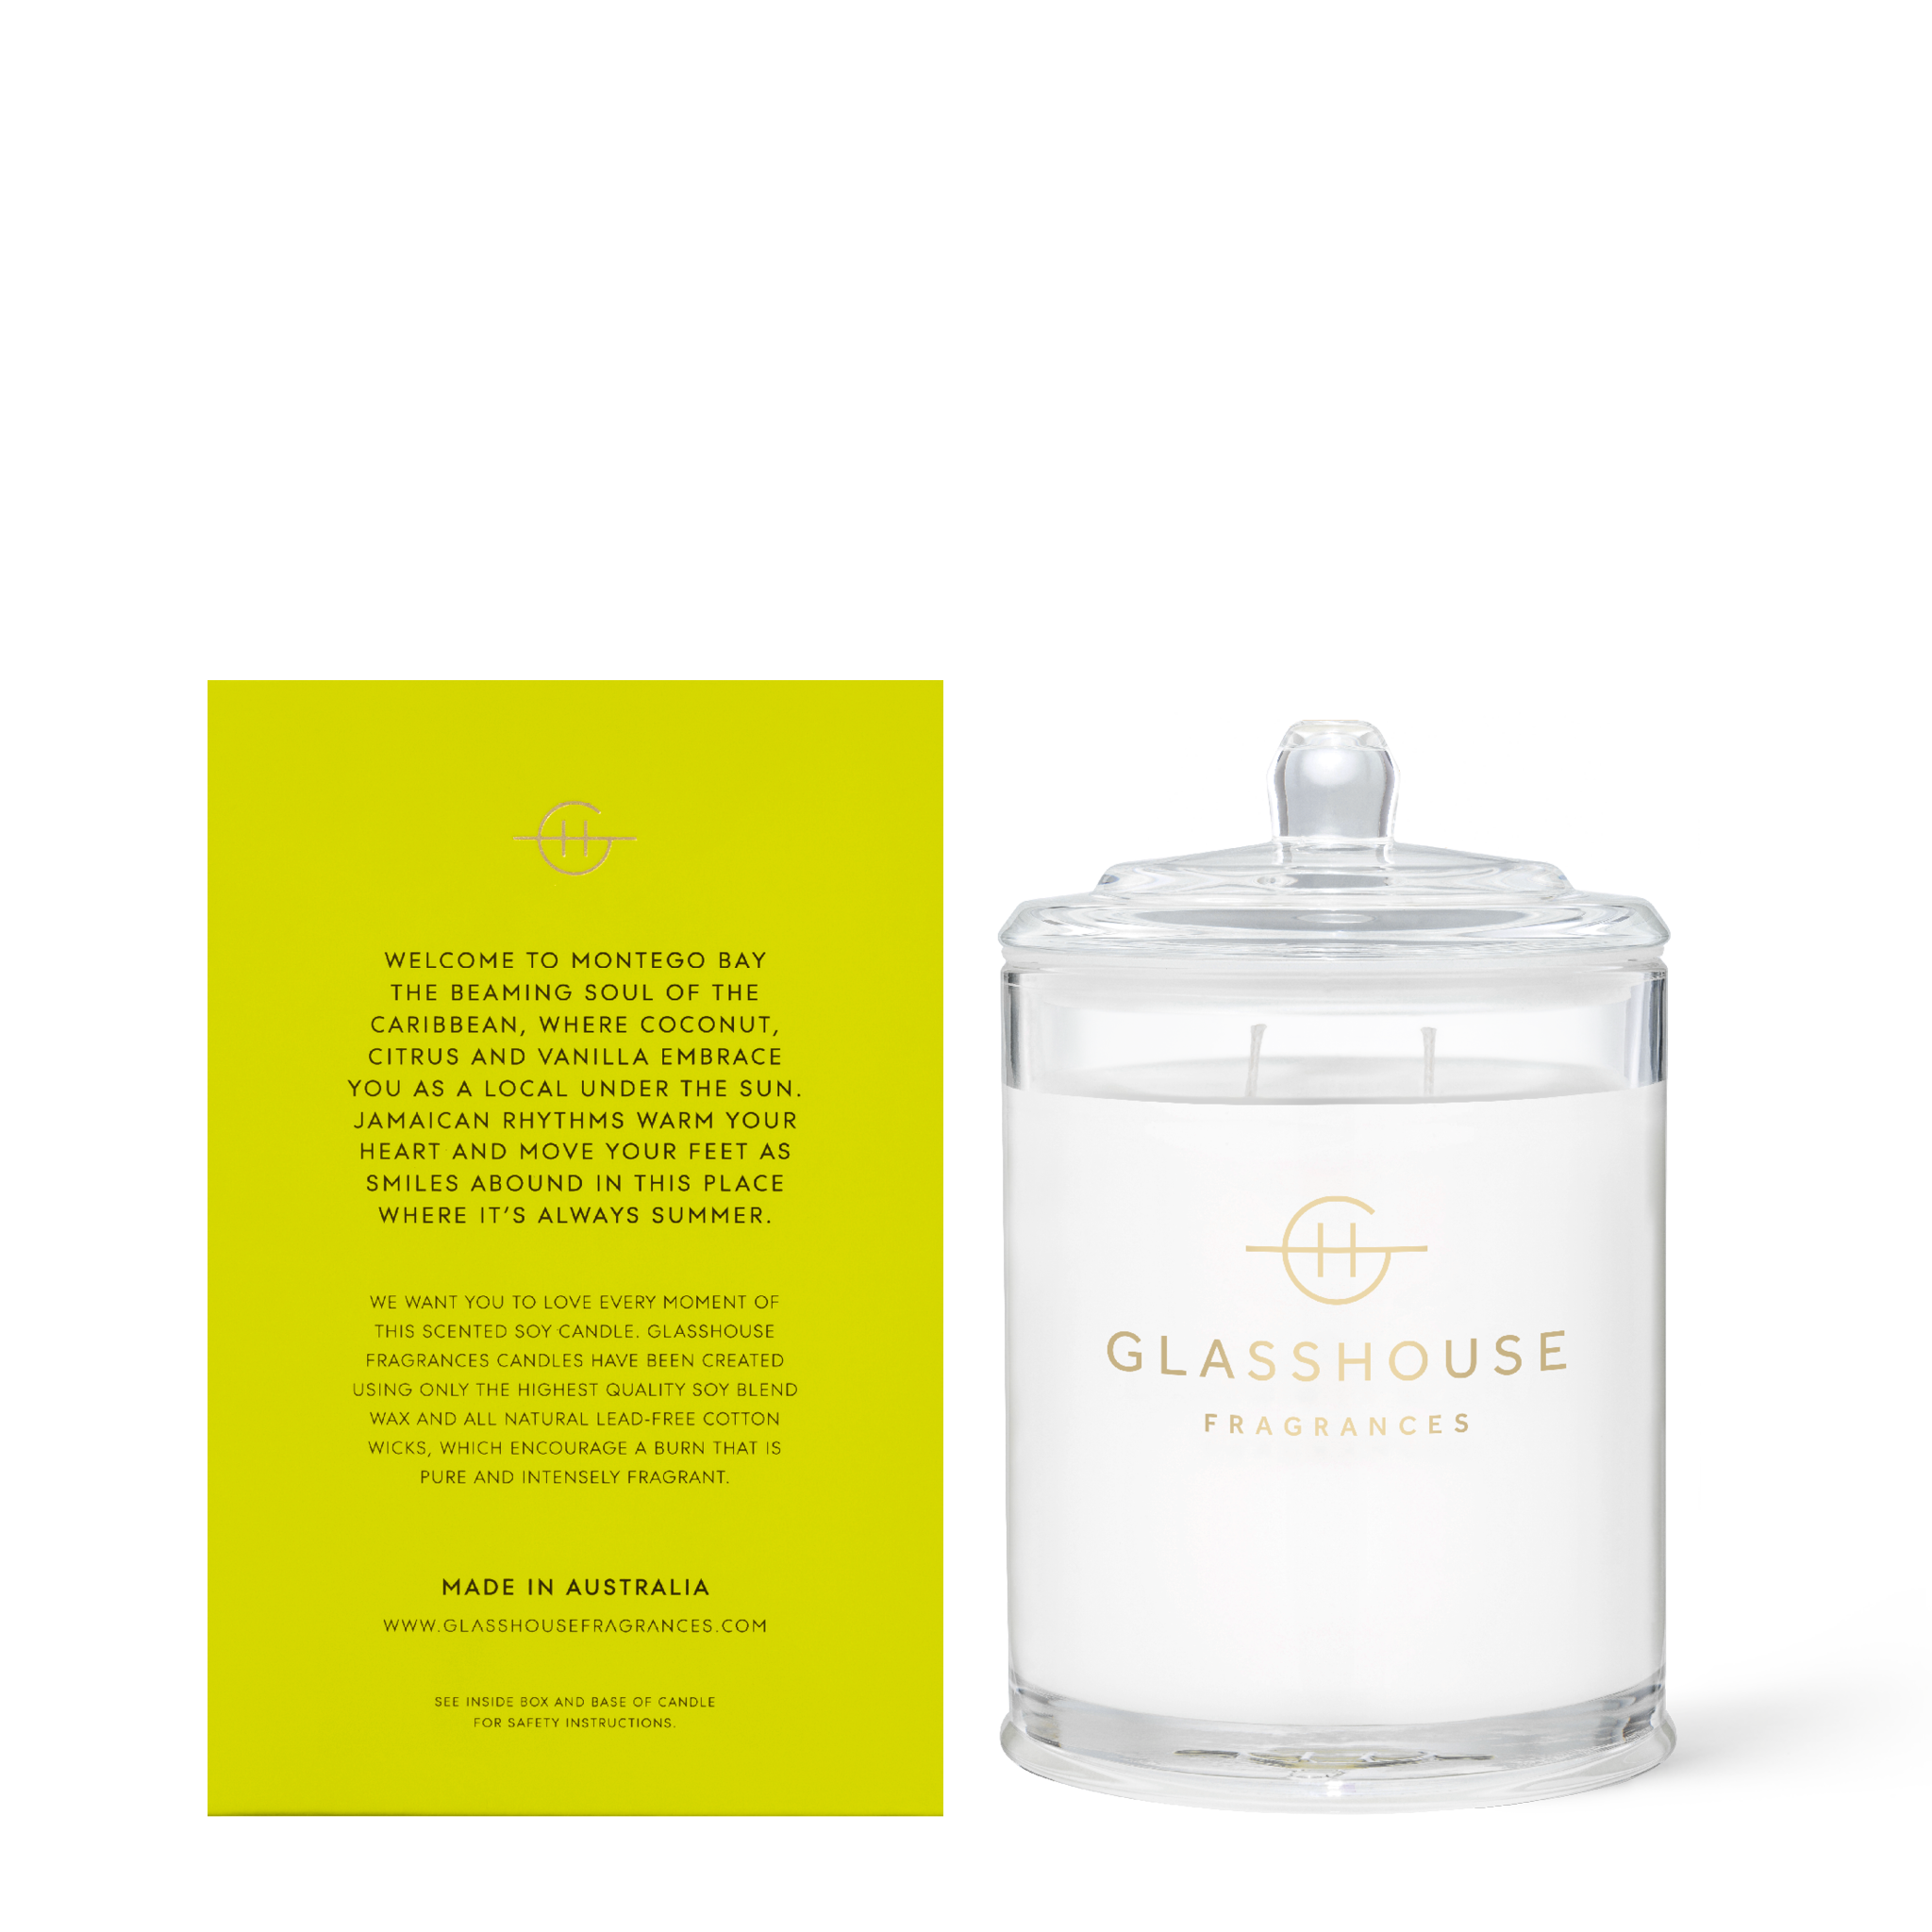 Glasshouse Fragrances Montego Bay Rhythm Coconut and Lime 380g Soy Candle with box - back of product shot